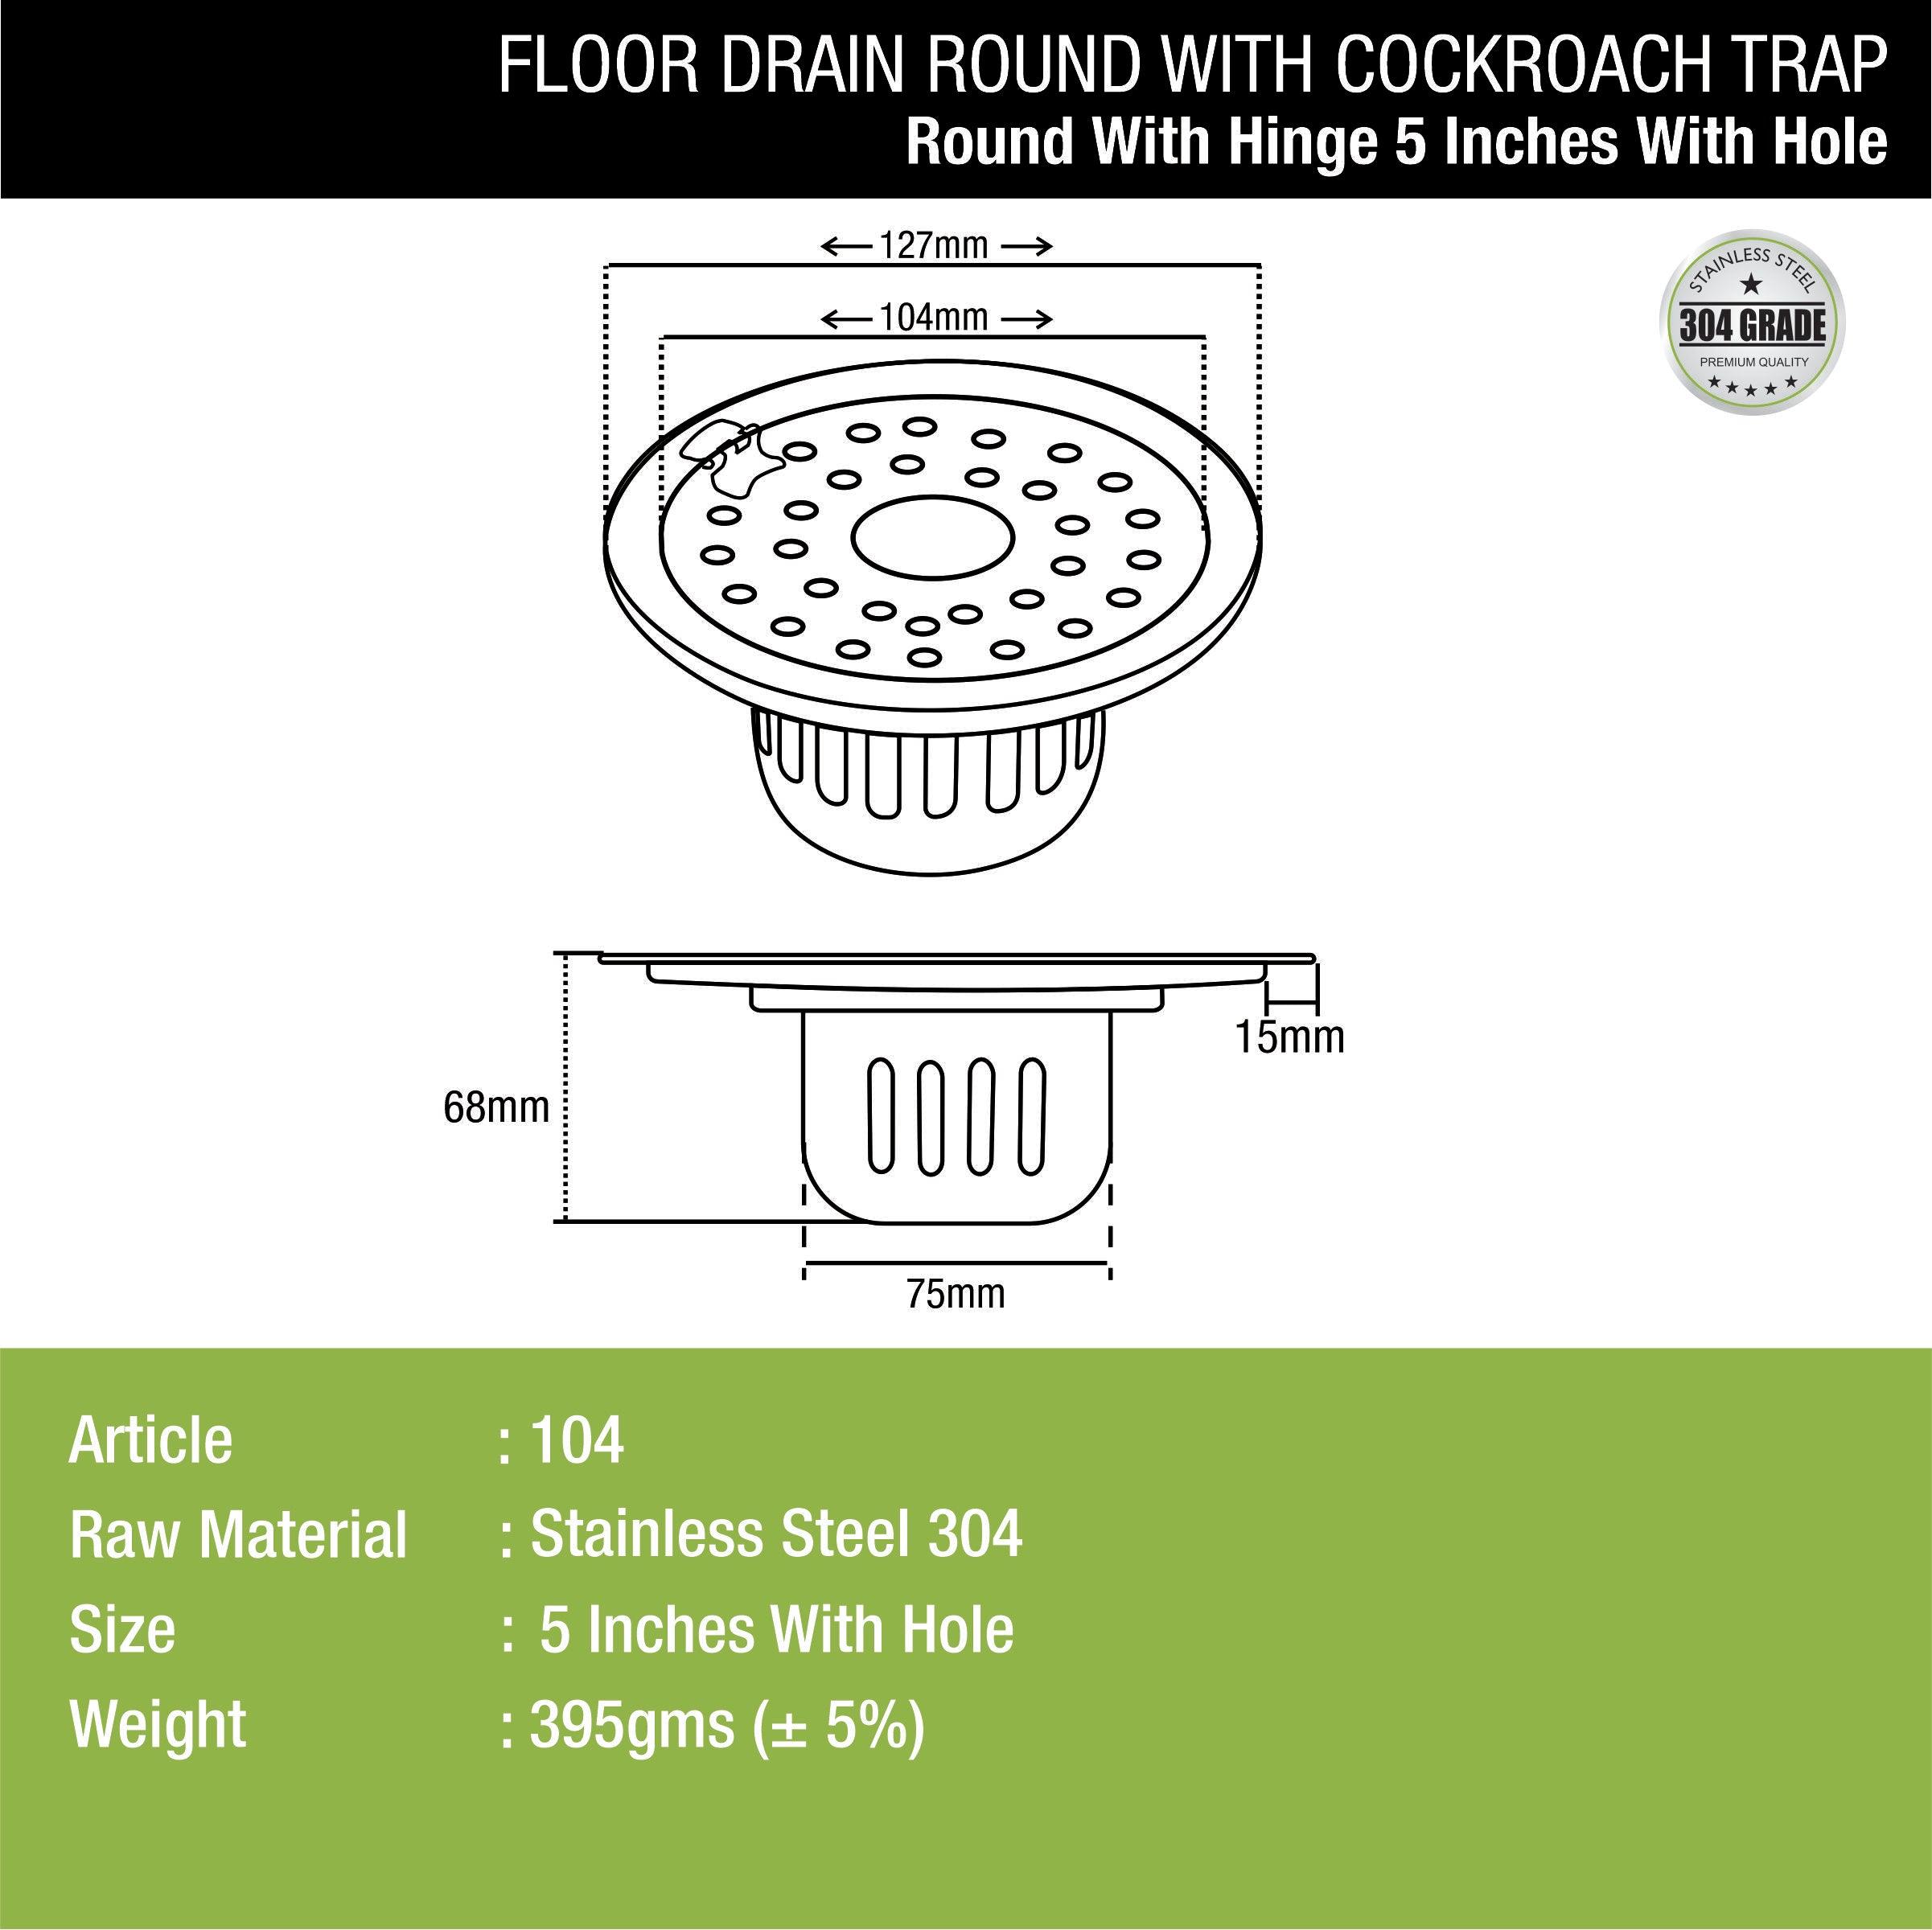 Round Floor Drain (5 inches) with Hinge & Cockroach Trap dimensions